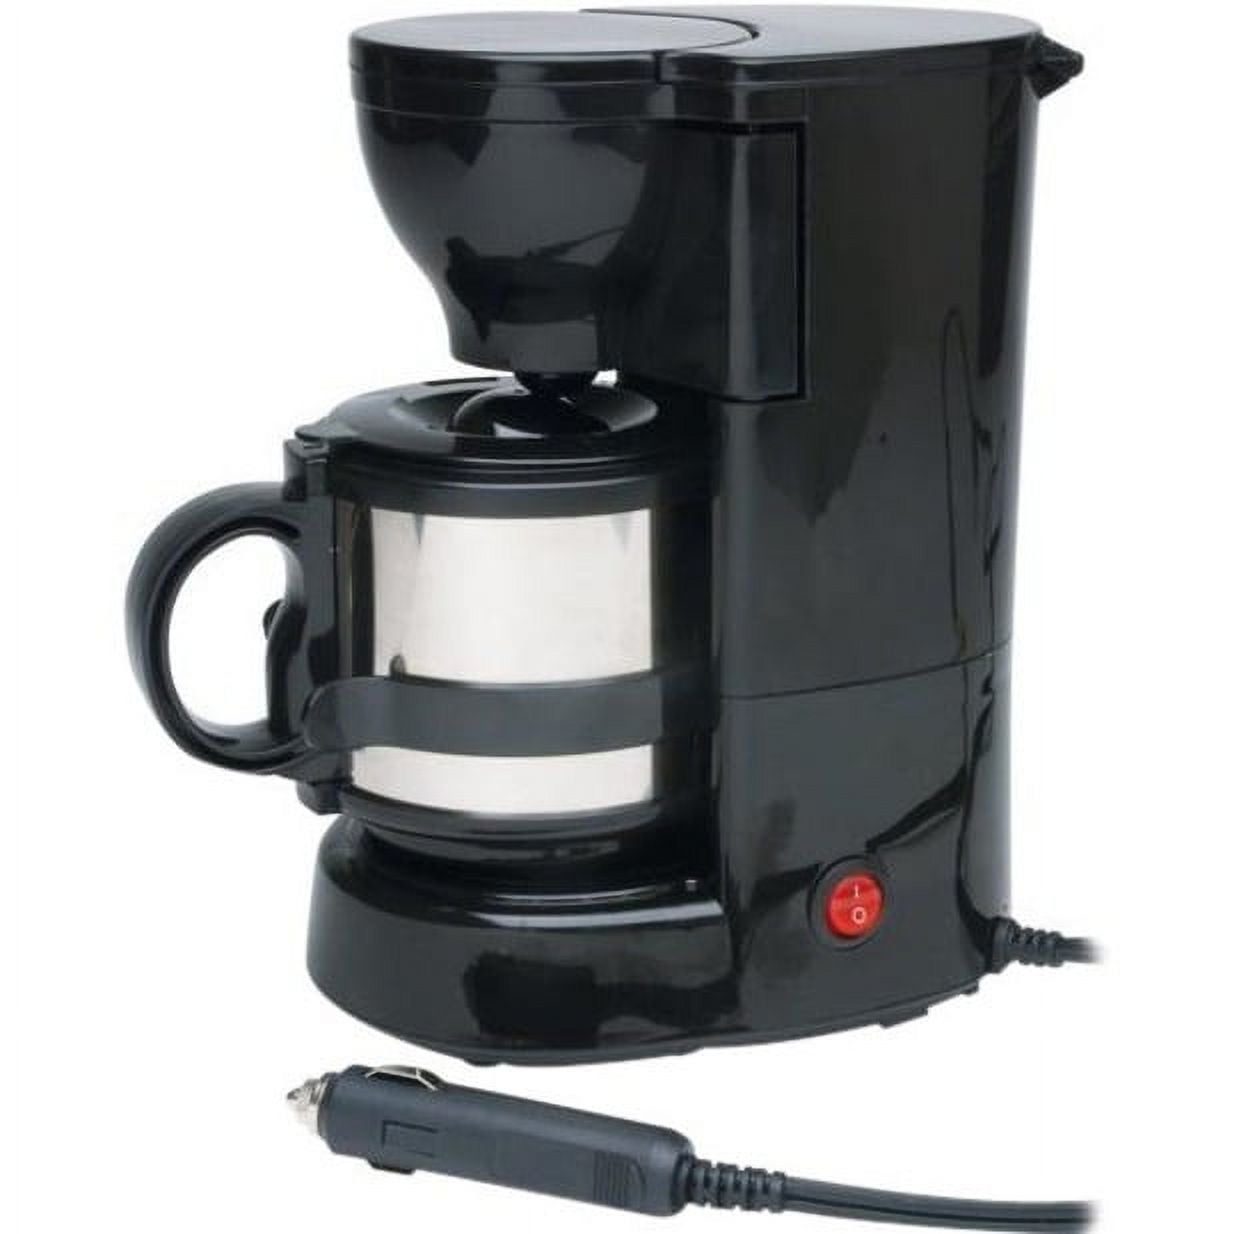 RoadPro 12-Volt Coffee Maker with 16oz. Metal Carafe